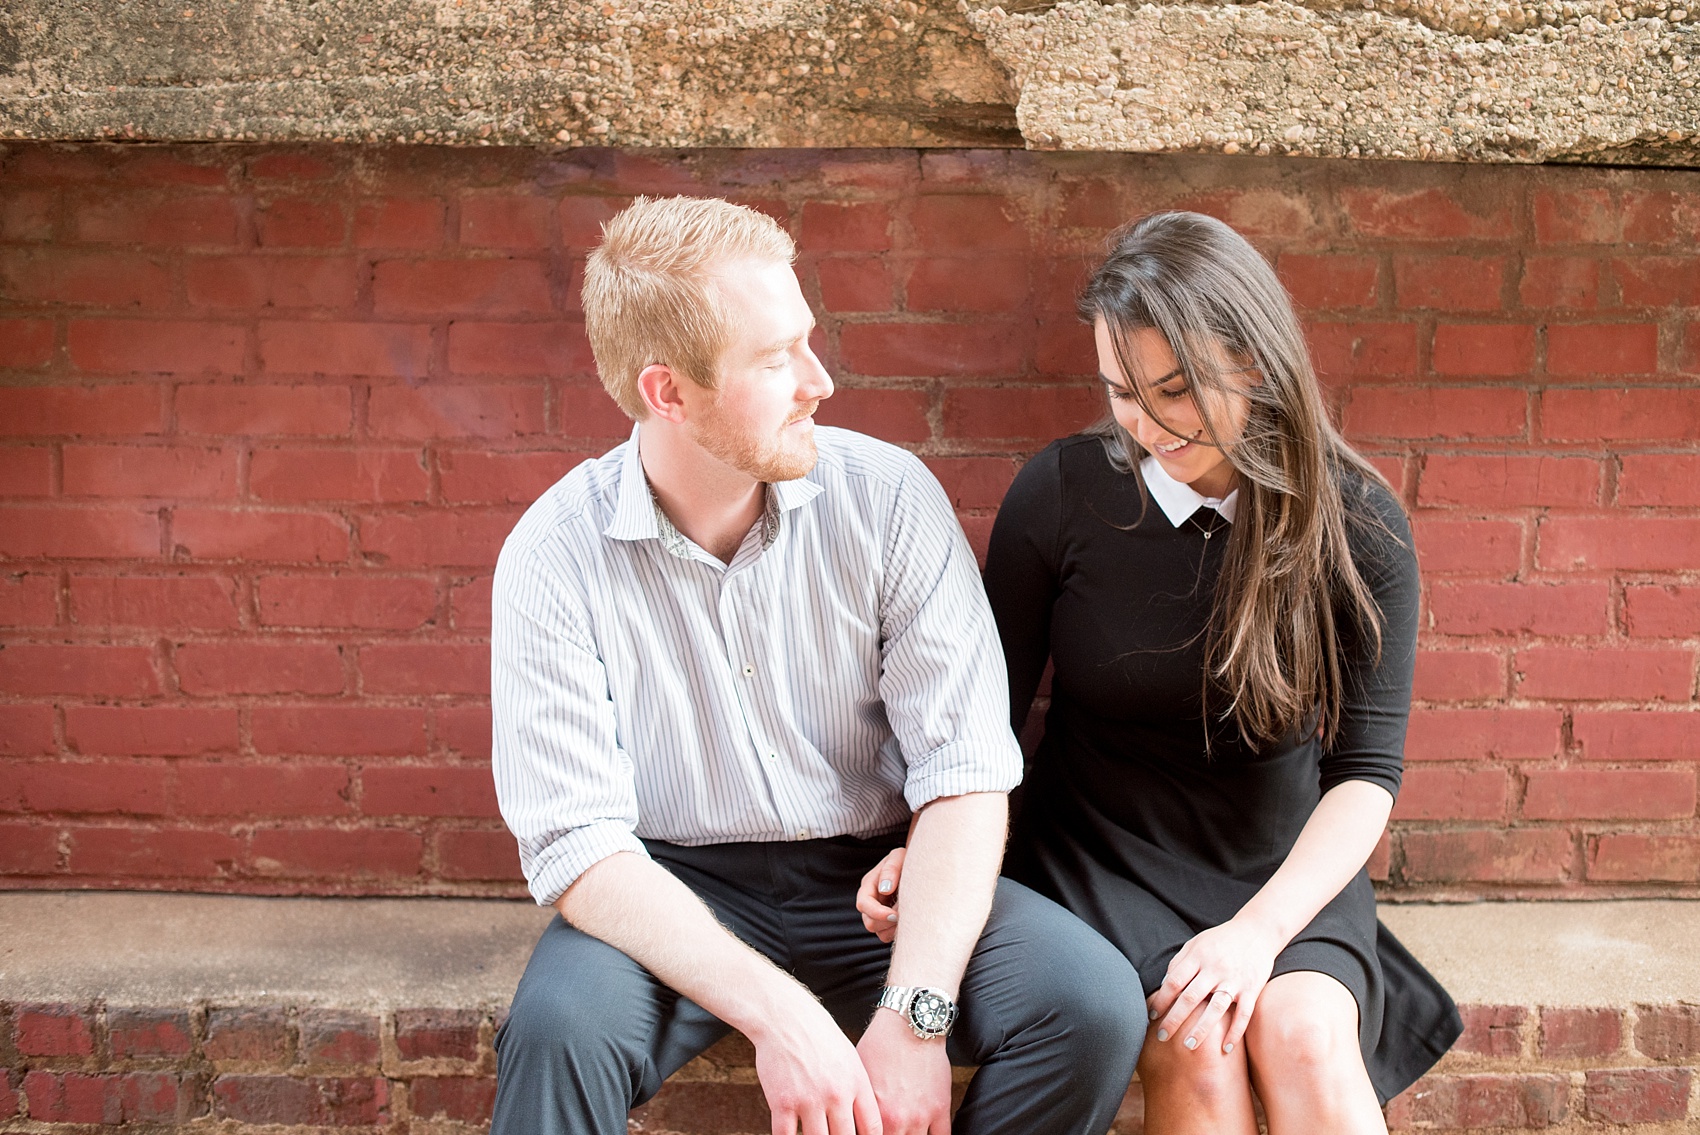 Mikkel Paige Photography photos of a downtown Raleigh engagement session.